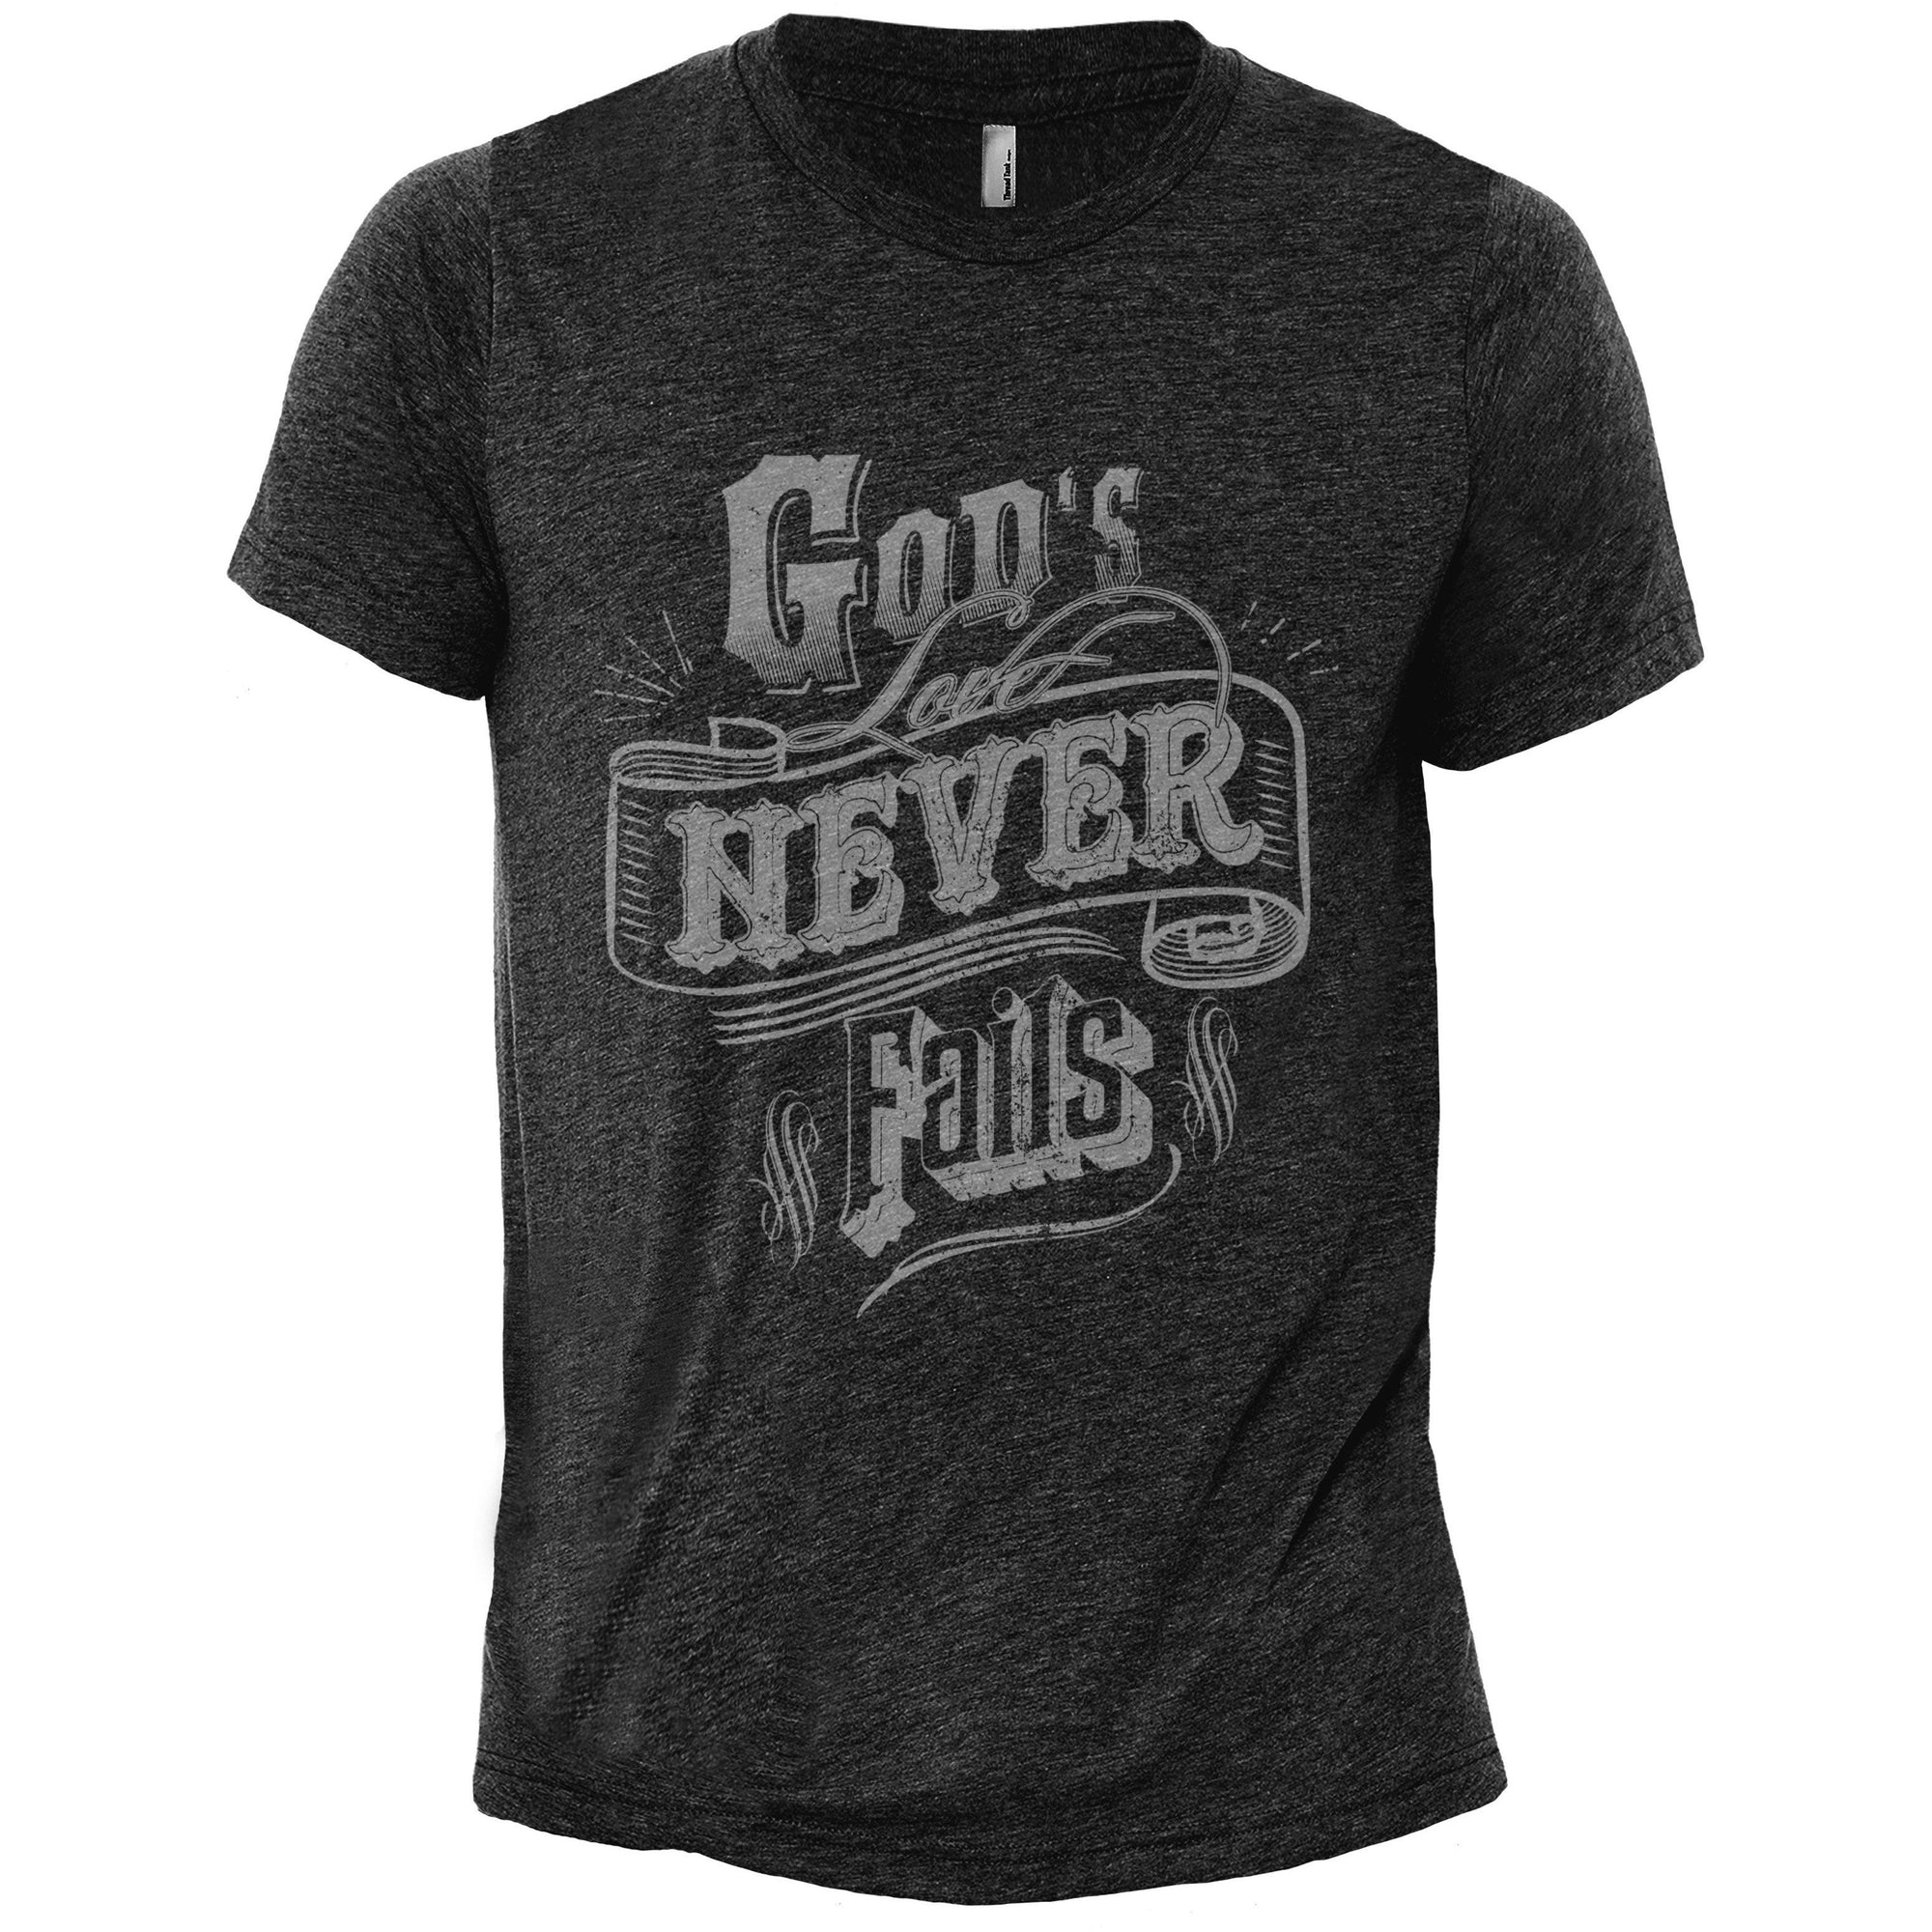 Gods Love Never Fails Charcoal Printed Graphic Men's Crew T-Shirt Tee